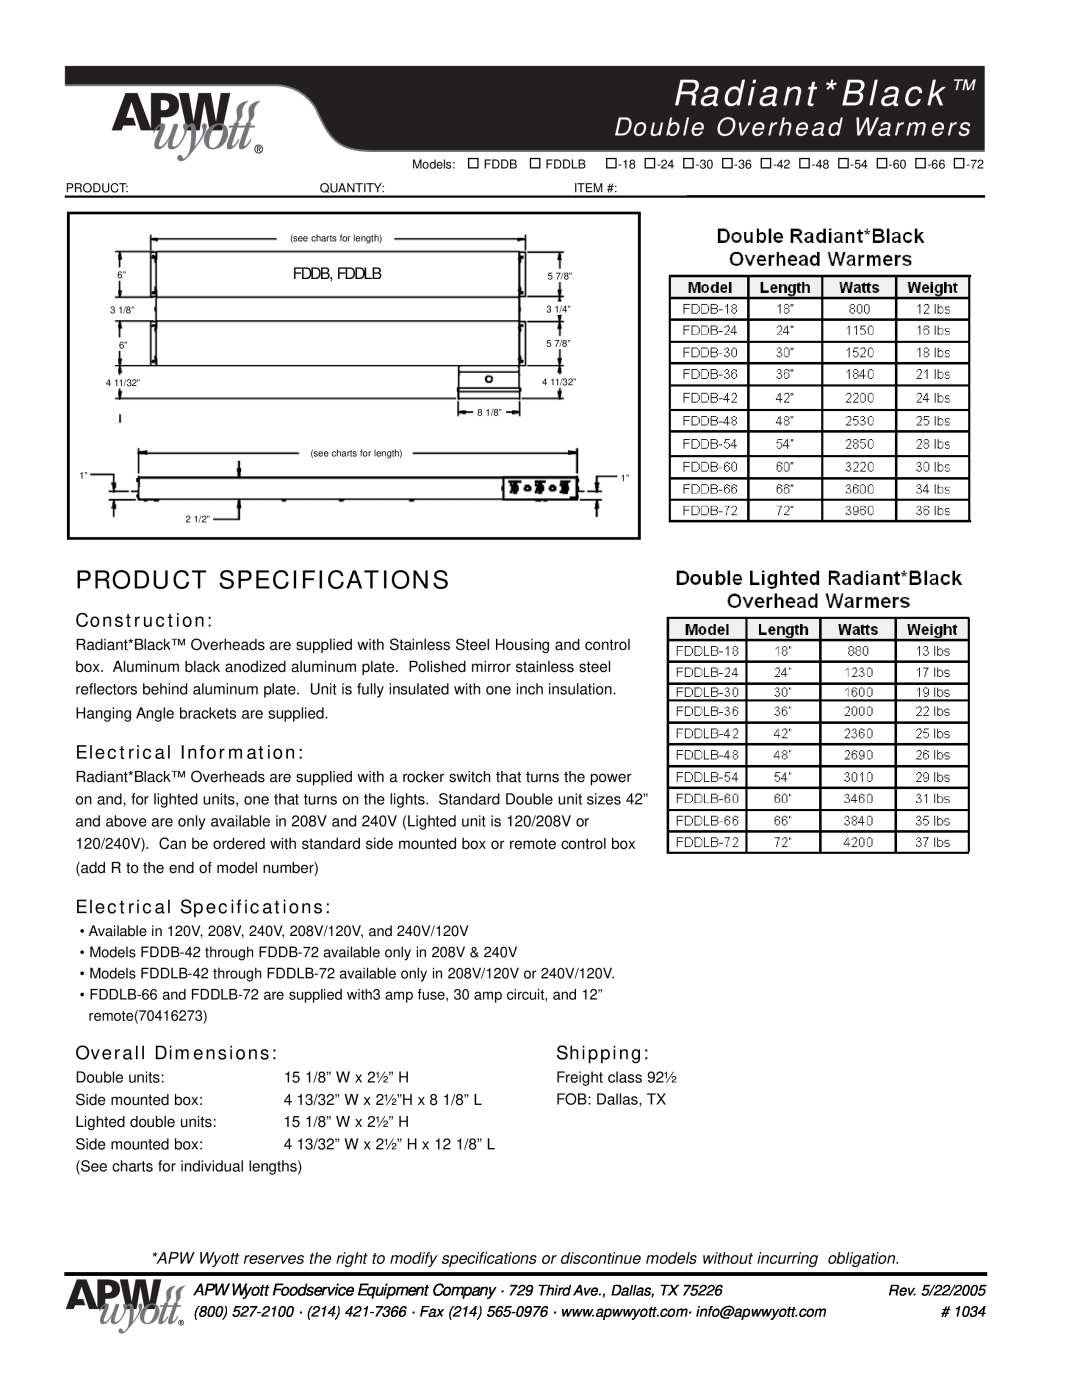 APW Wyott FDDB, FDDLB Product Specifications, Radiant*Black, Double Overhead Warmers, Construction, Electrical Information 